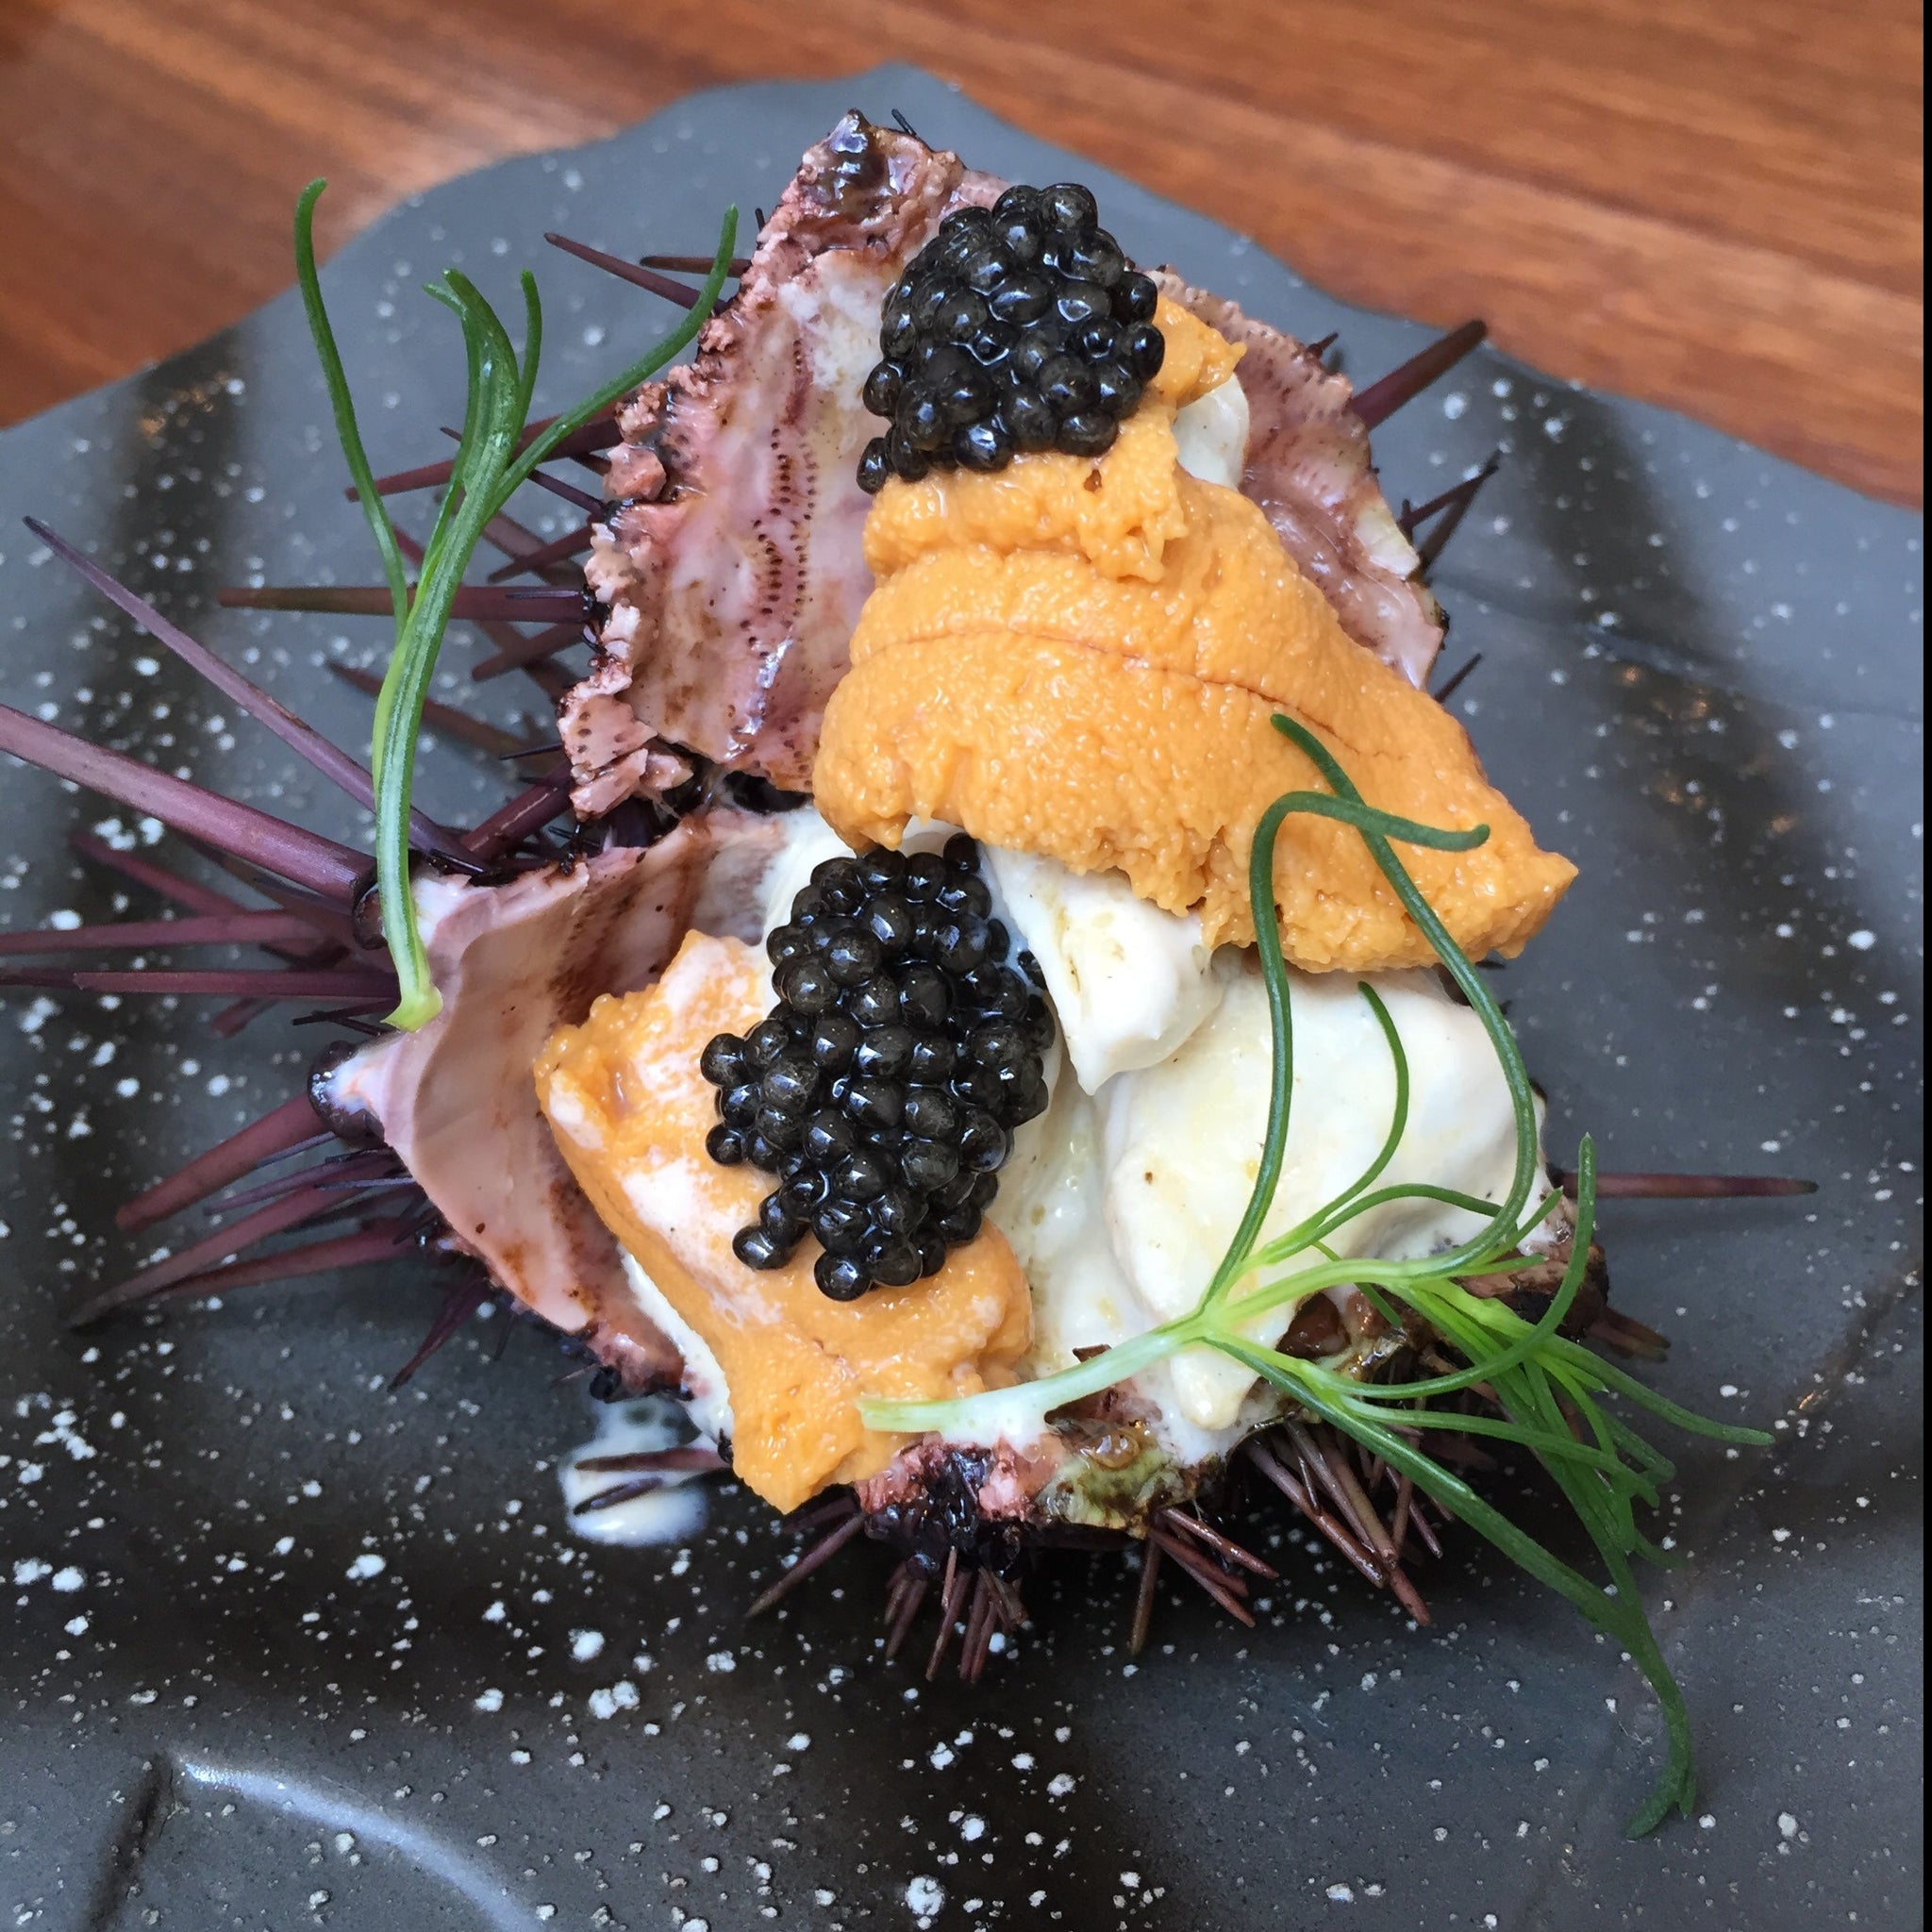 Uni as an appetizer on an oyster with caviar